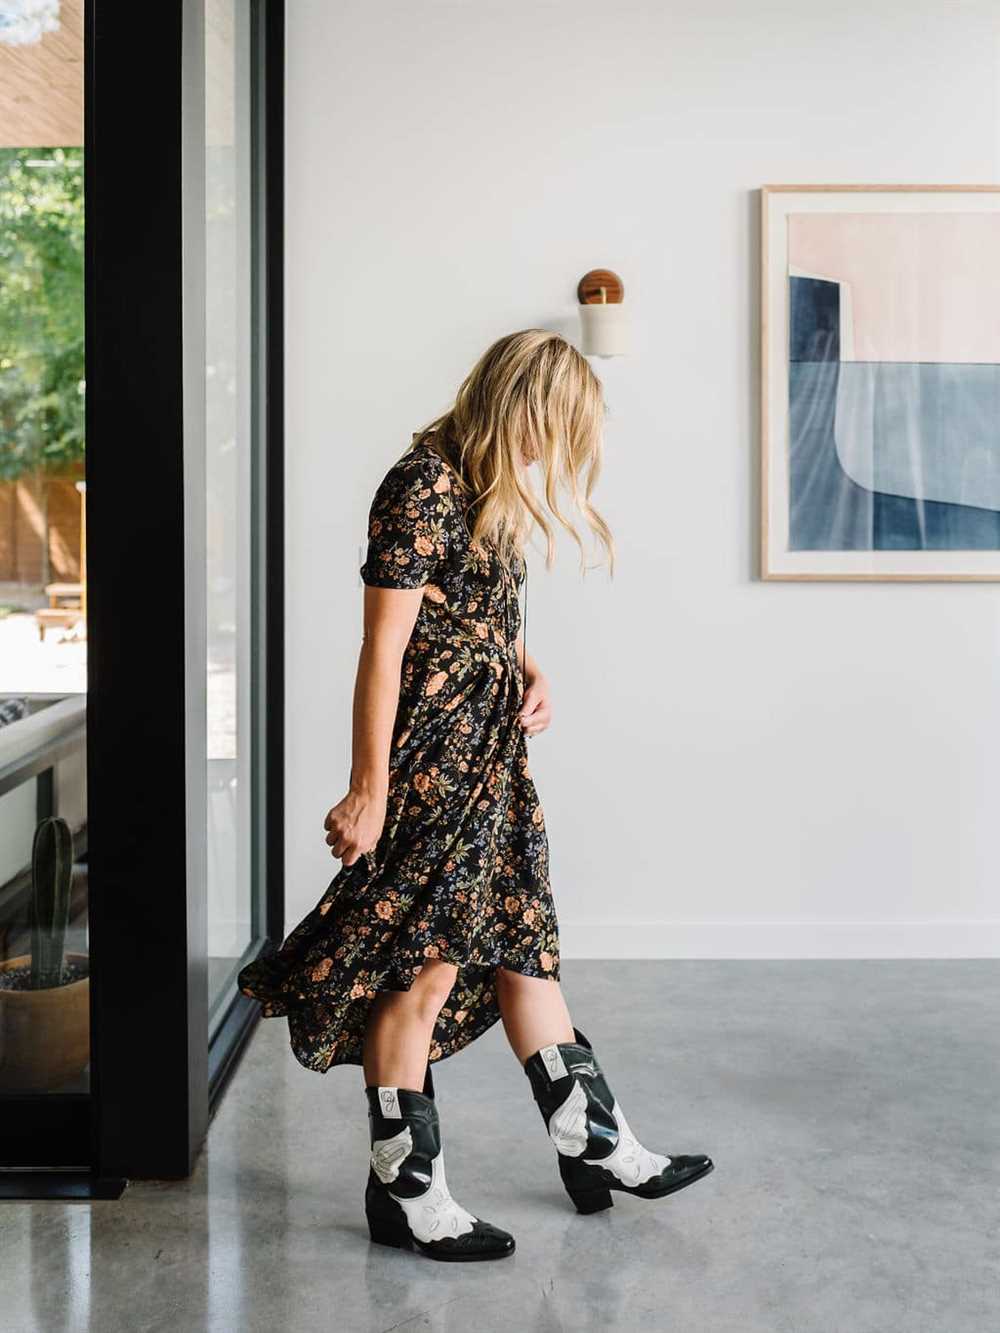 How to wear cowgirl boots with dresses